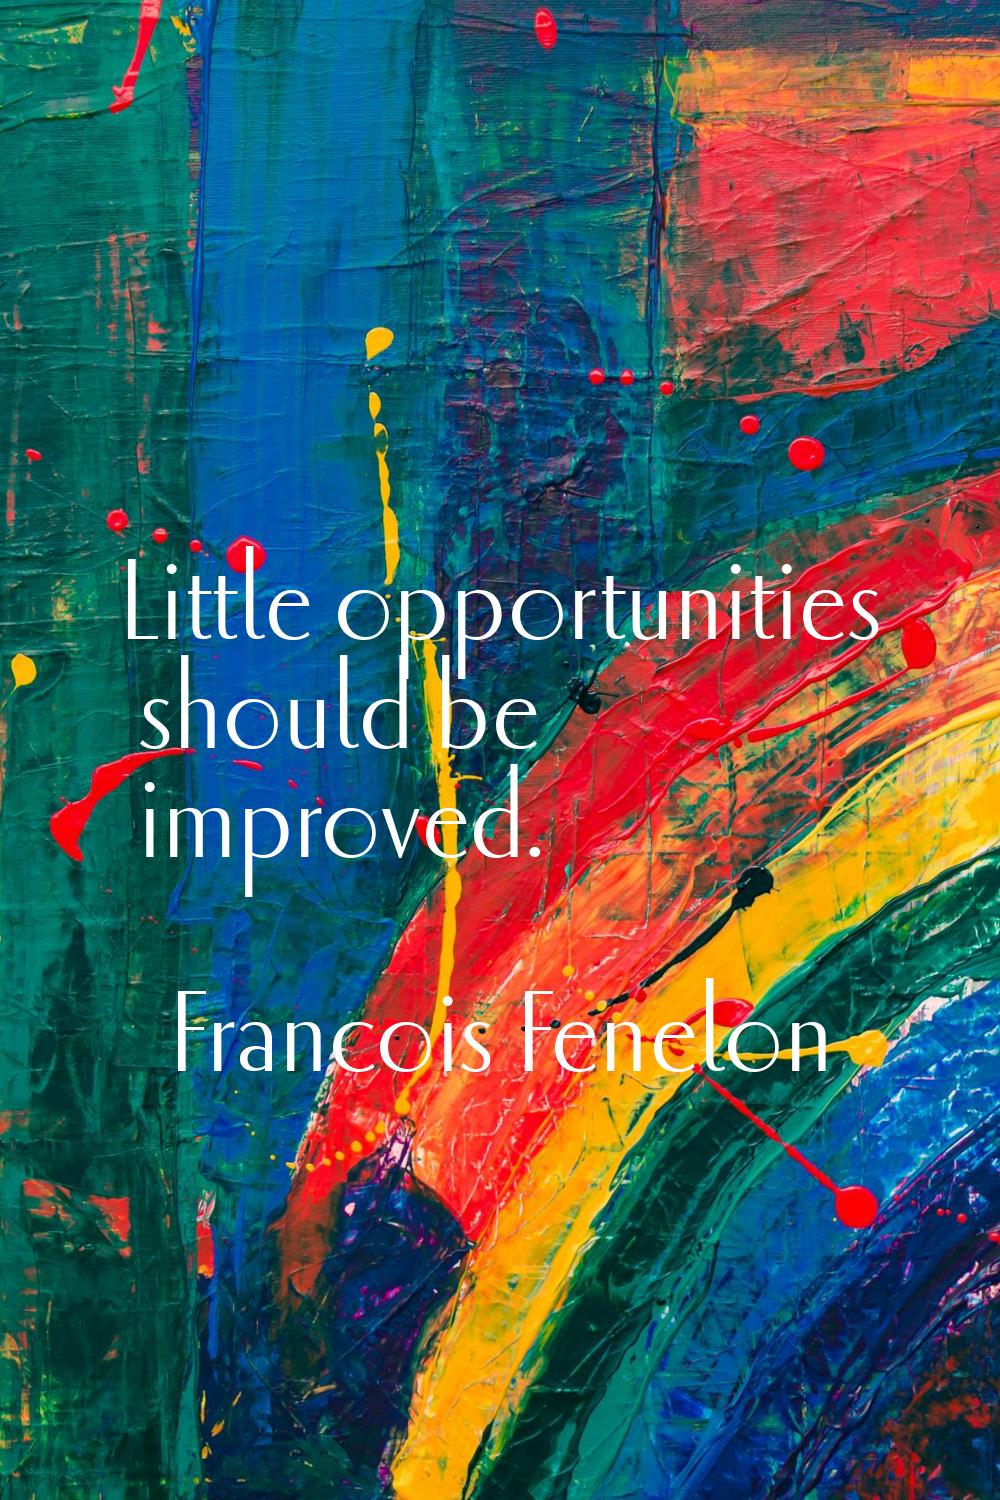 Little opportunities should be improved.